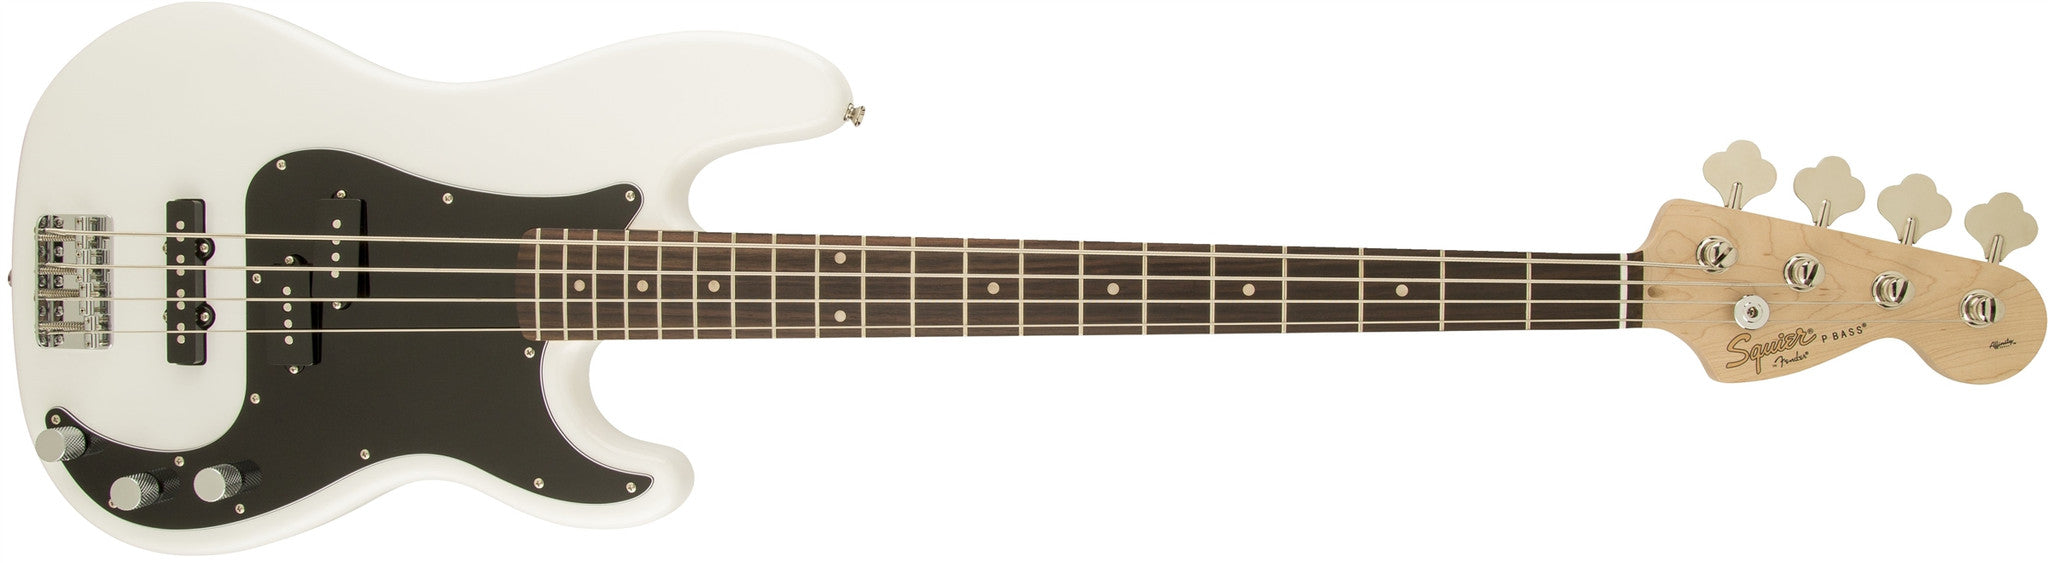 Squier Affinity Series Precision Bass, PJ Olympic White 0370500505